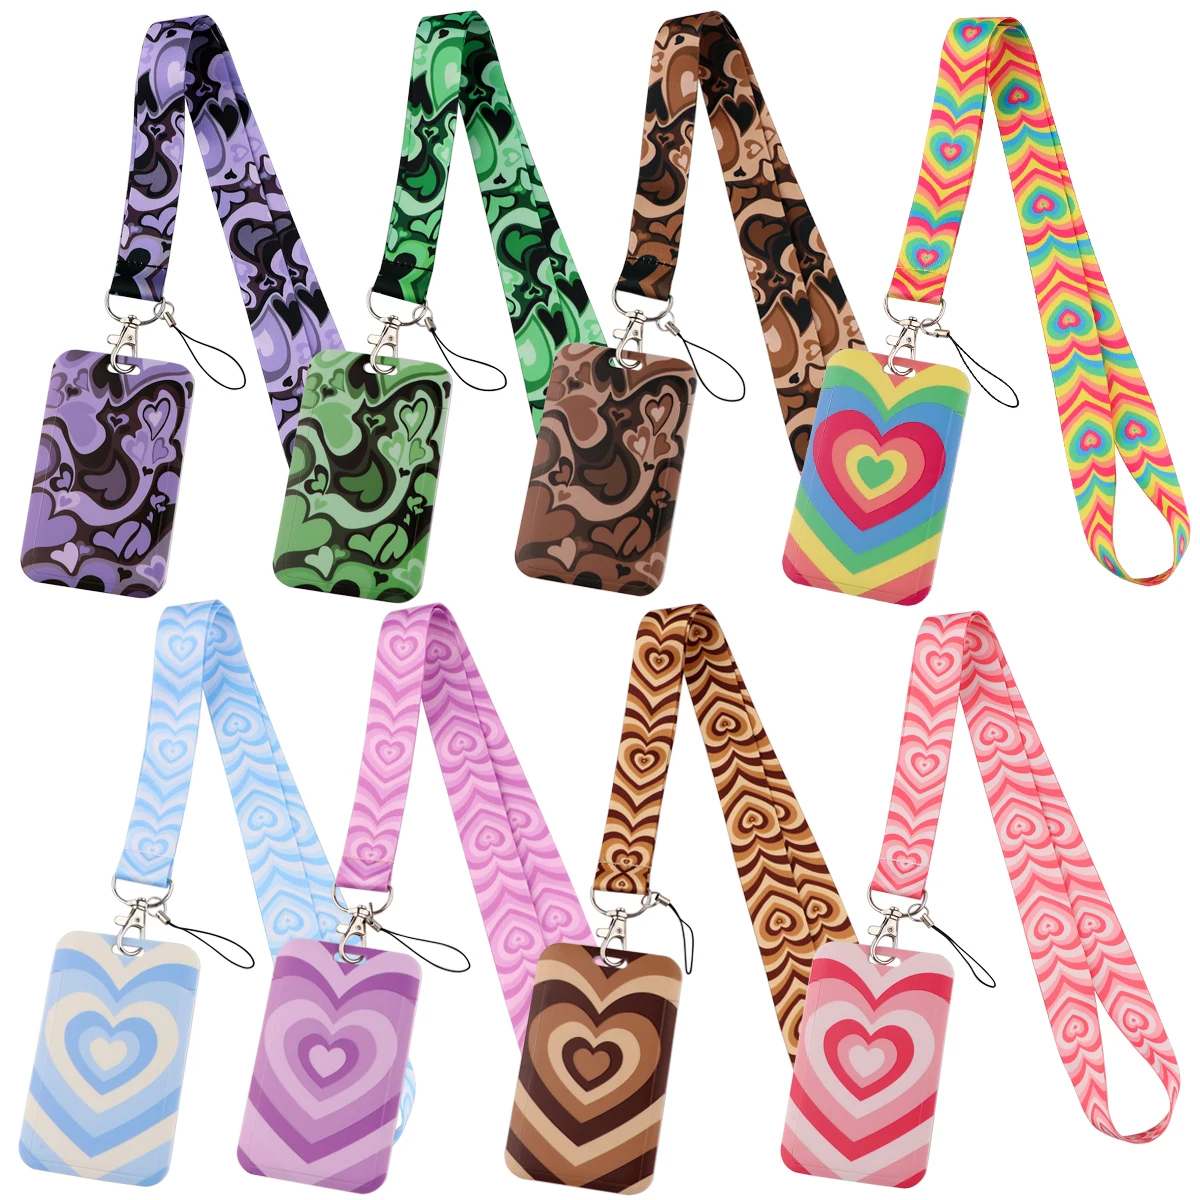 Colorful Heart Lanyard Love Neck Strap for key ID Card Cellphone Straps Badge Holder DIY Hanging Rope Neckband Accessories